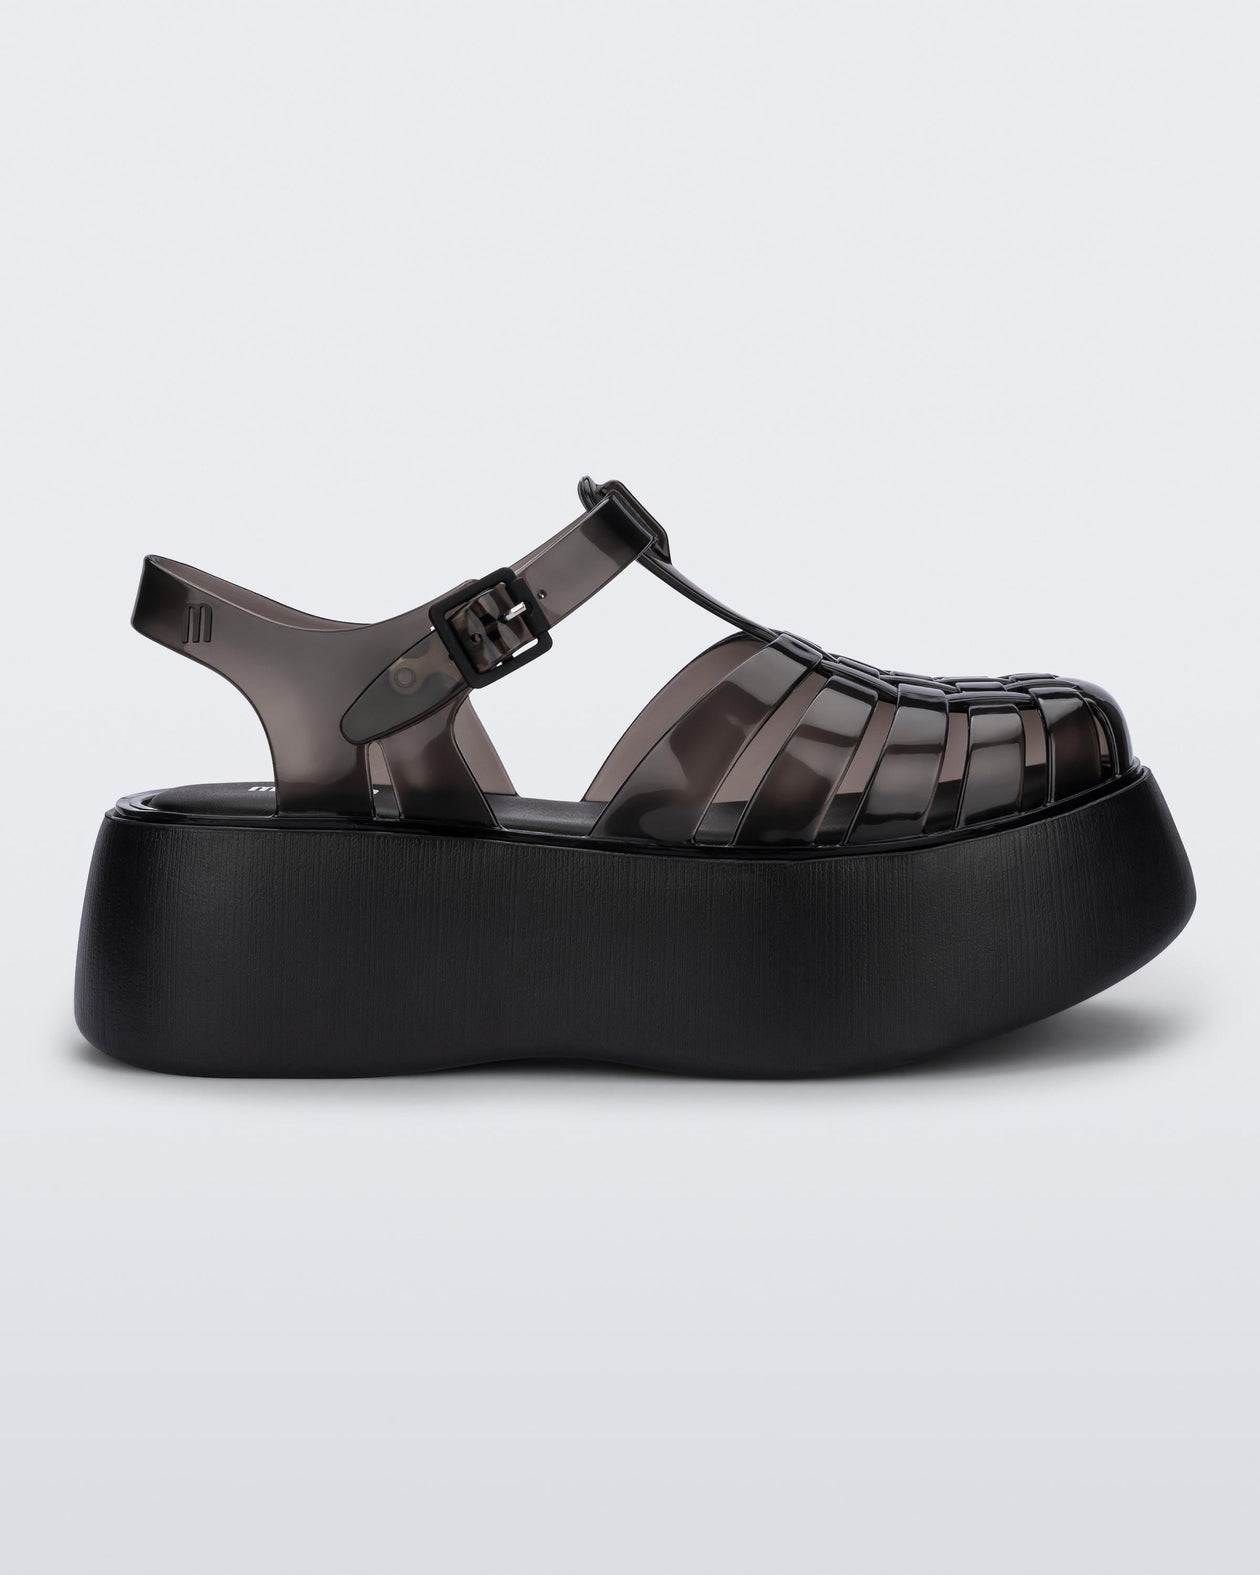 Side view of a black Melissa Possession Platform sandal with several straps and a closed toe front.